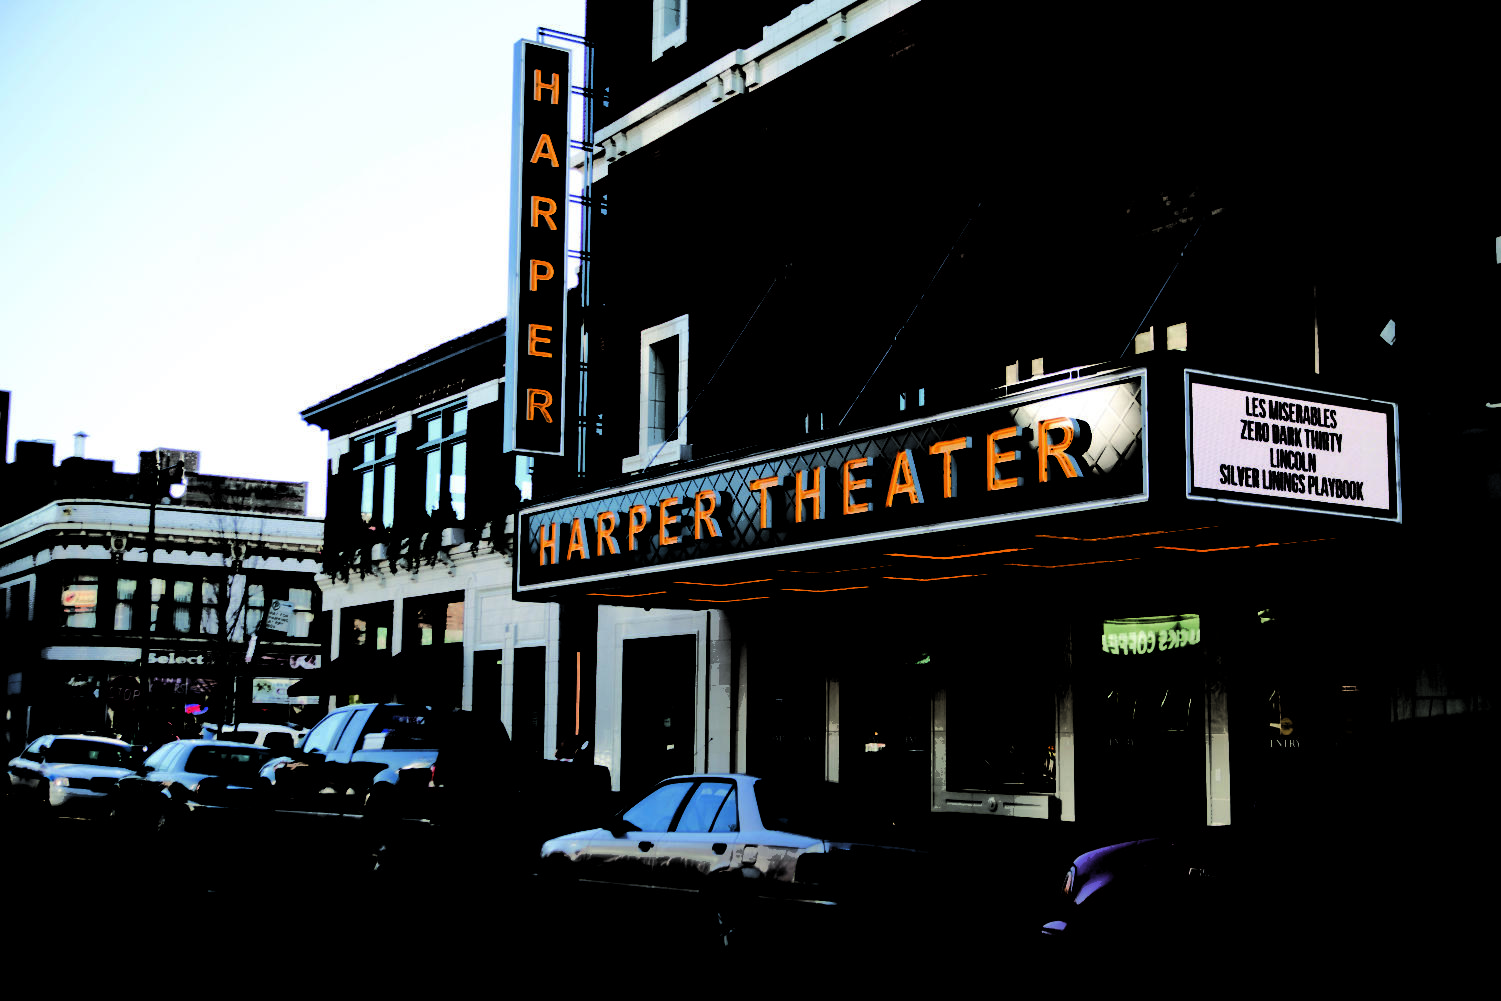 Harper Theater, located on the corner of 53rd and Harper, is celebrating their highly anticipated, grand opening today.